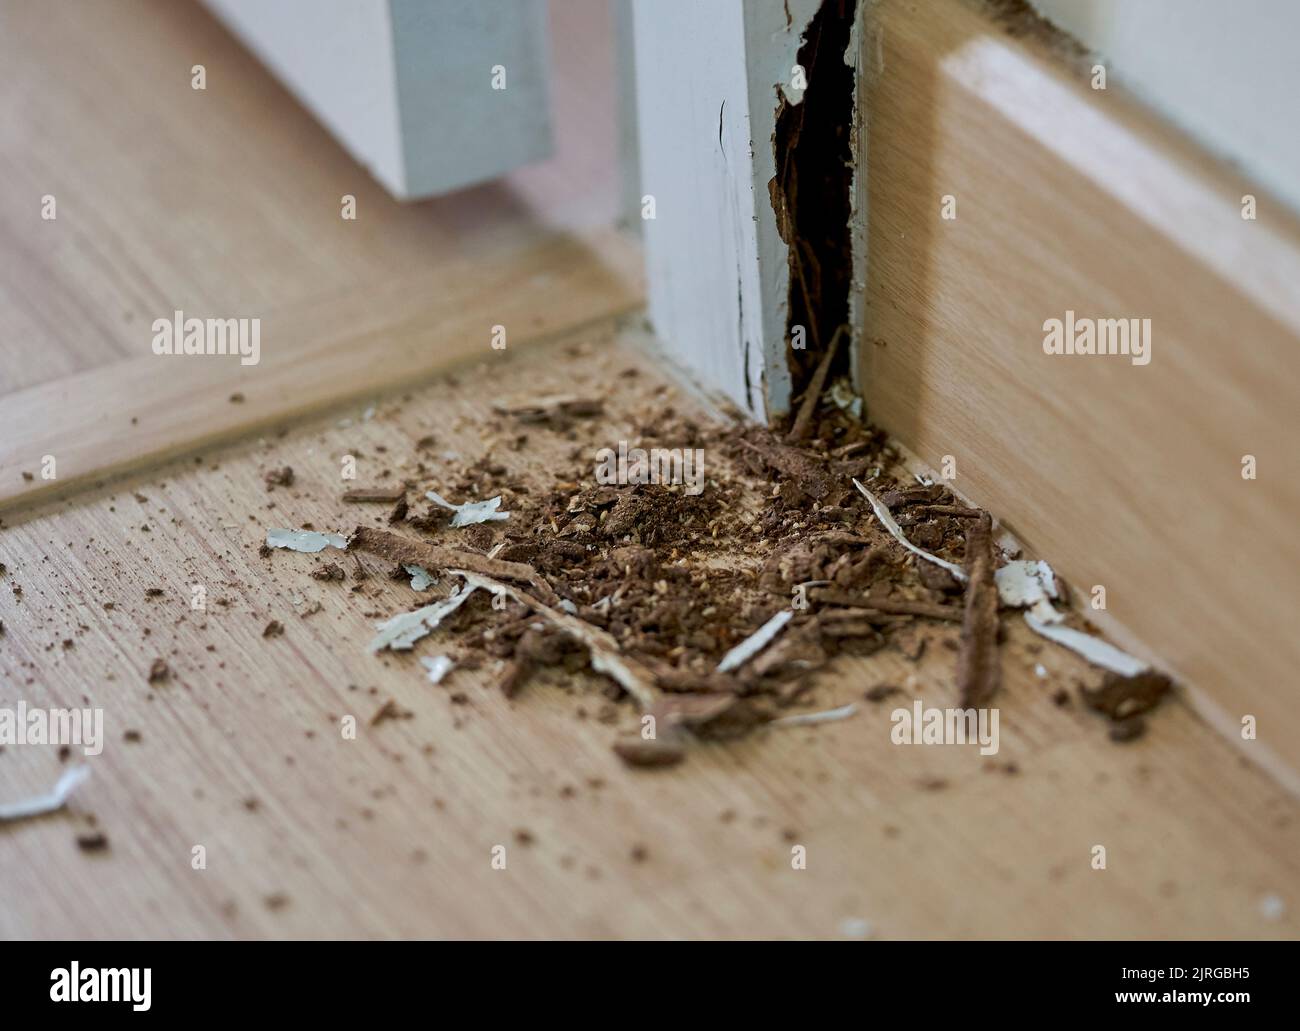 A close-up of termites in a house and the damage they caused. Stock Photo